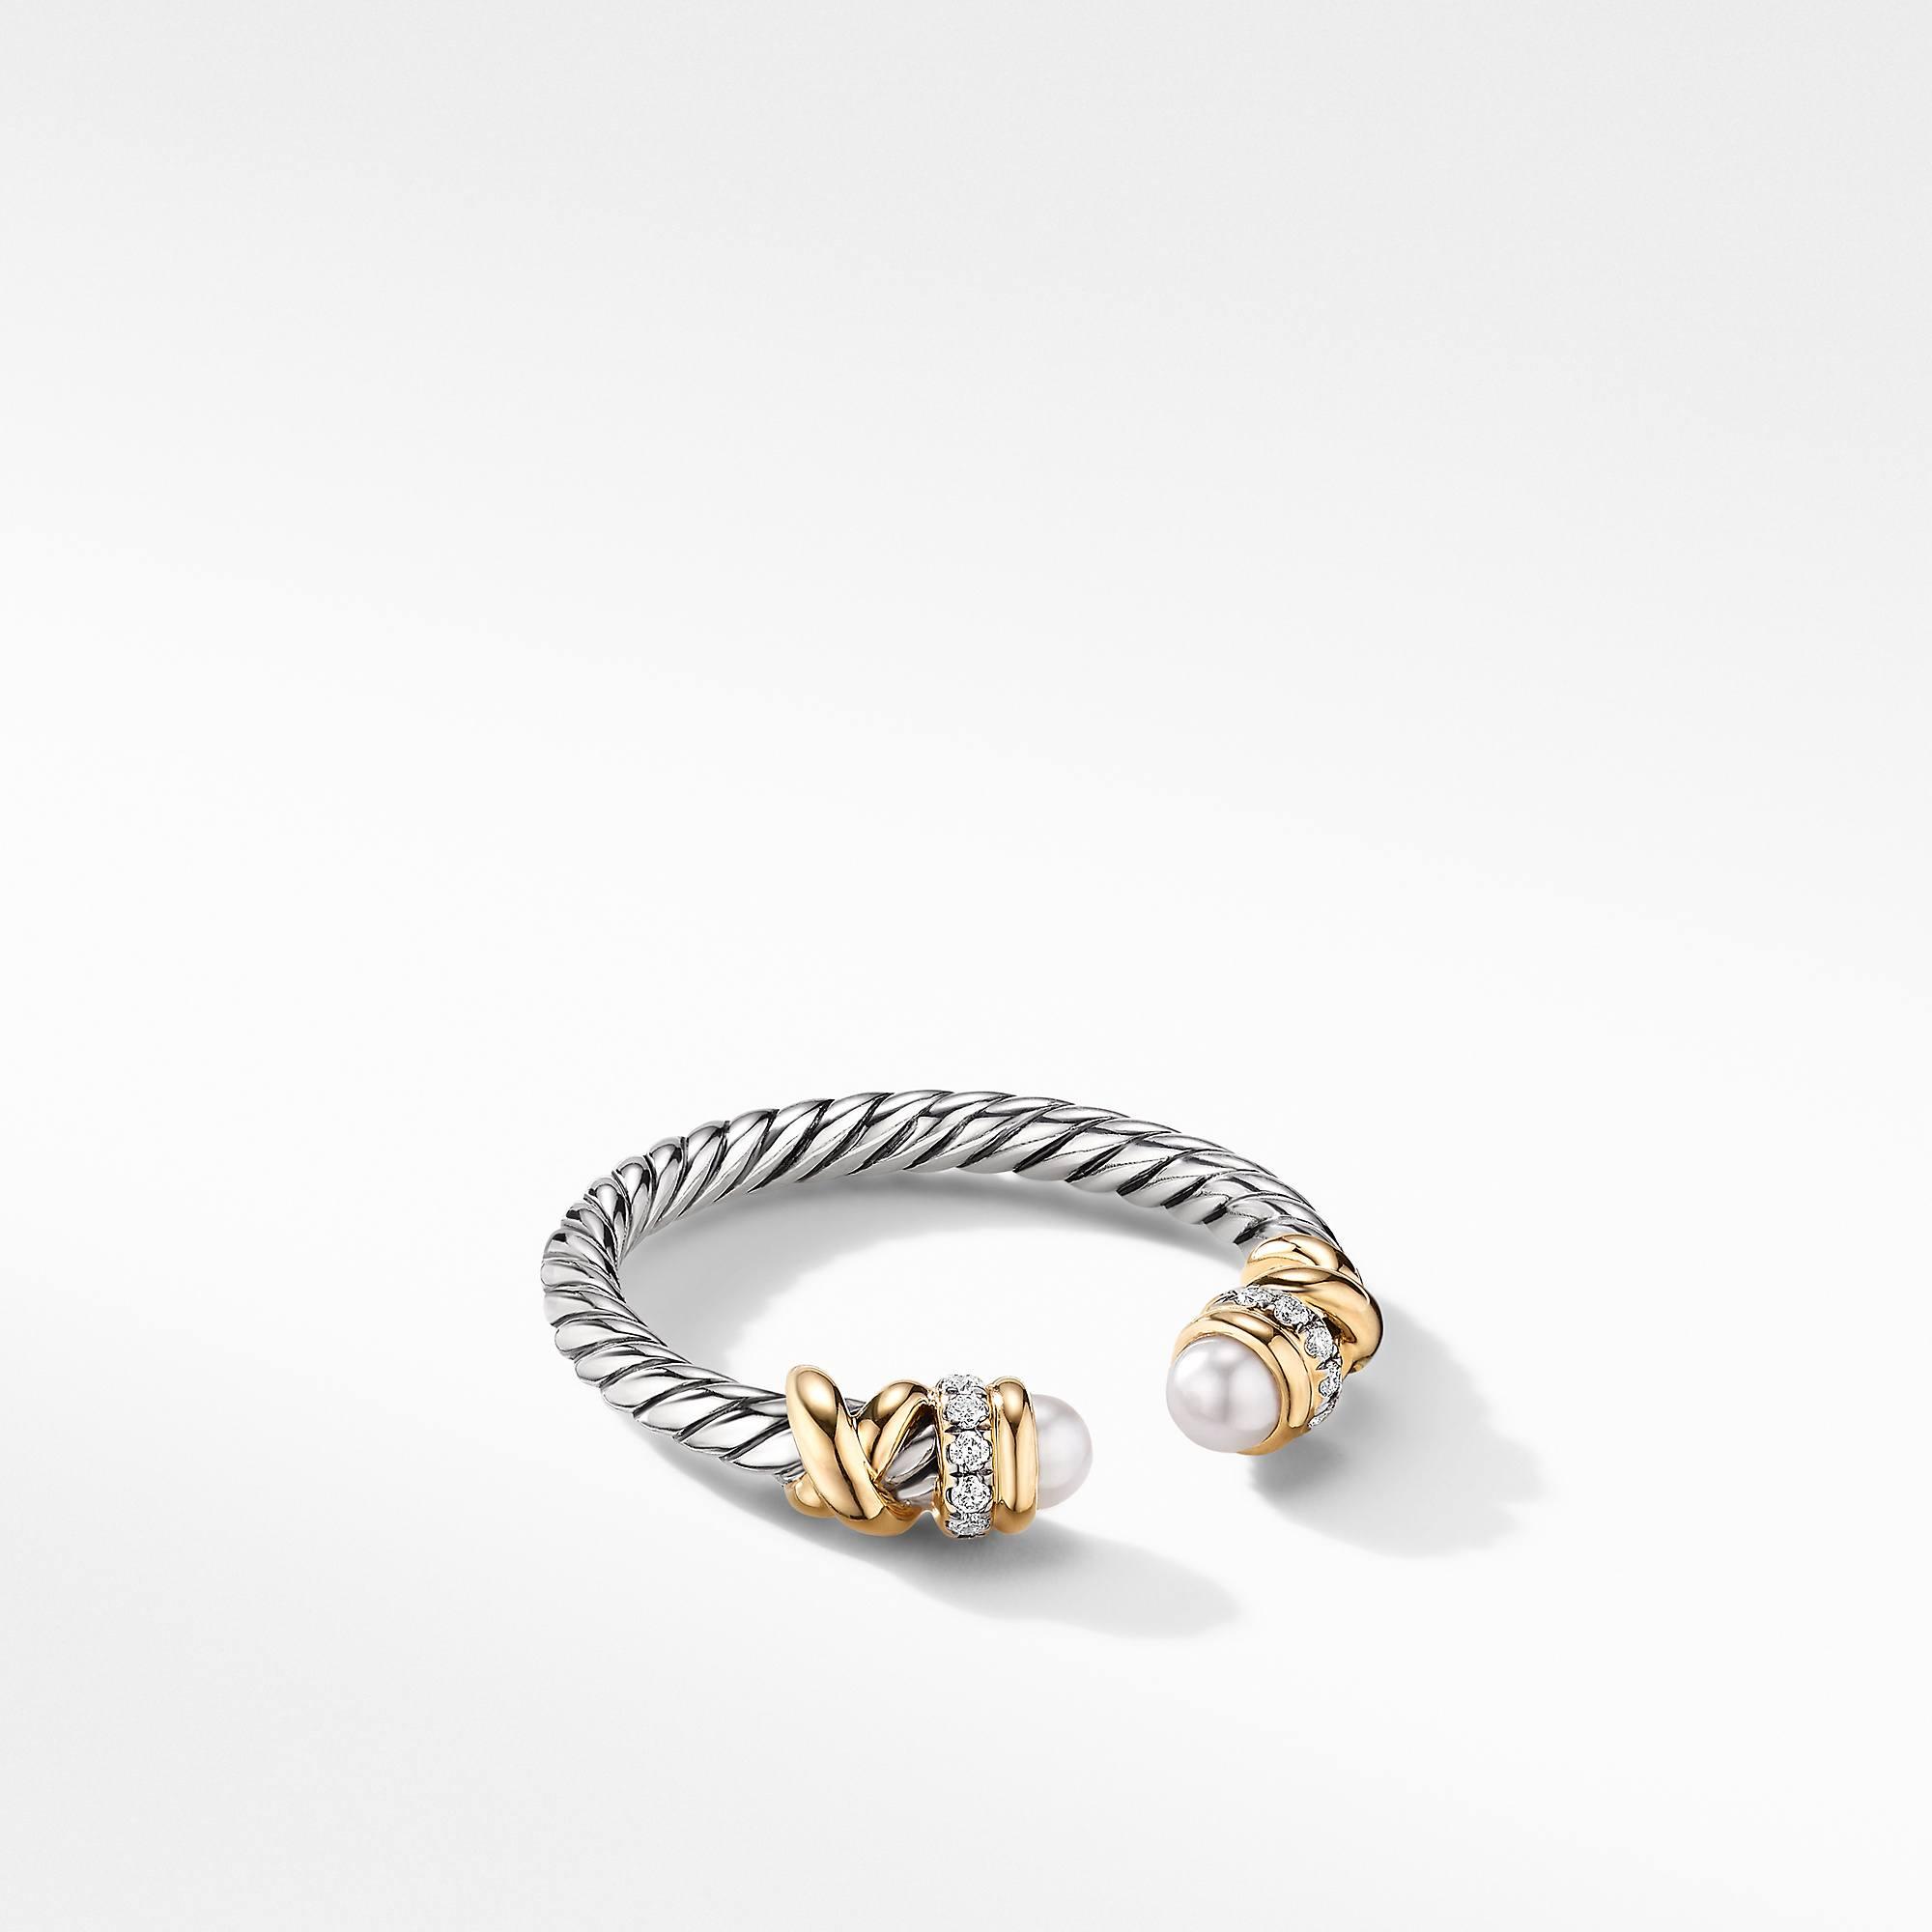 David Yurman Petite Helena Open Ring with Pearls, 18K Yellow Gold and Diamonds | Side View